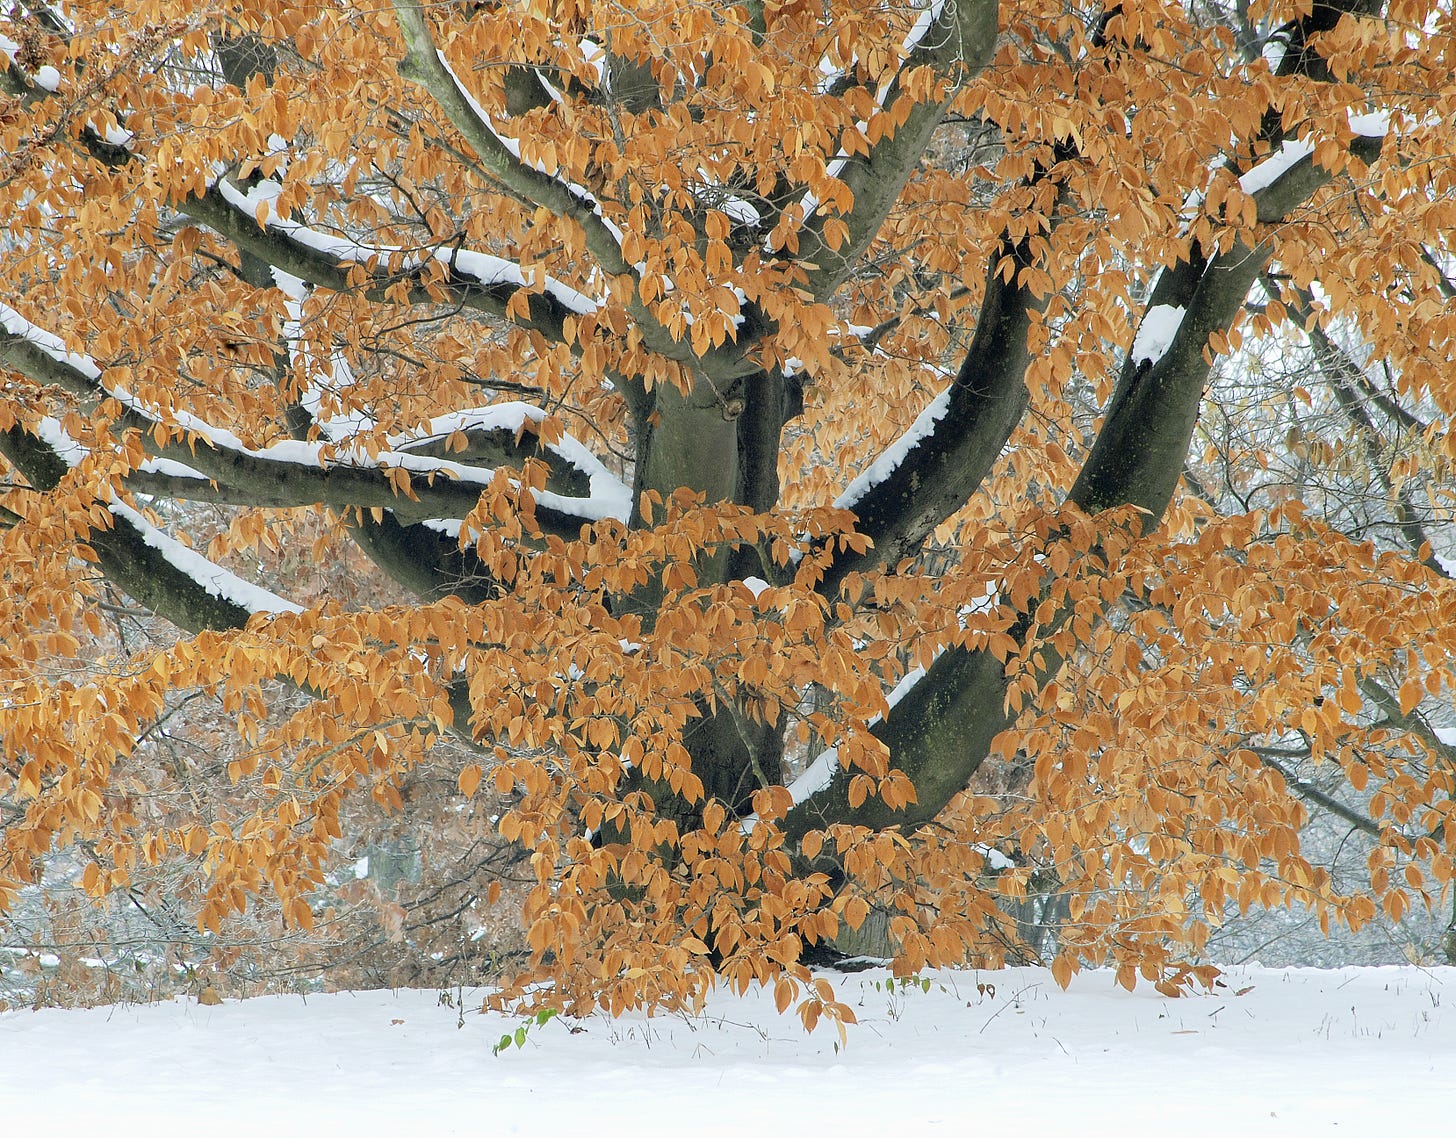 A beech tree with snow on its branches, but still covered with golden leaves